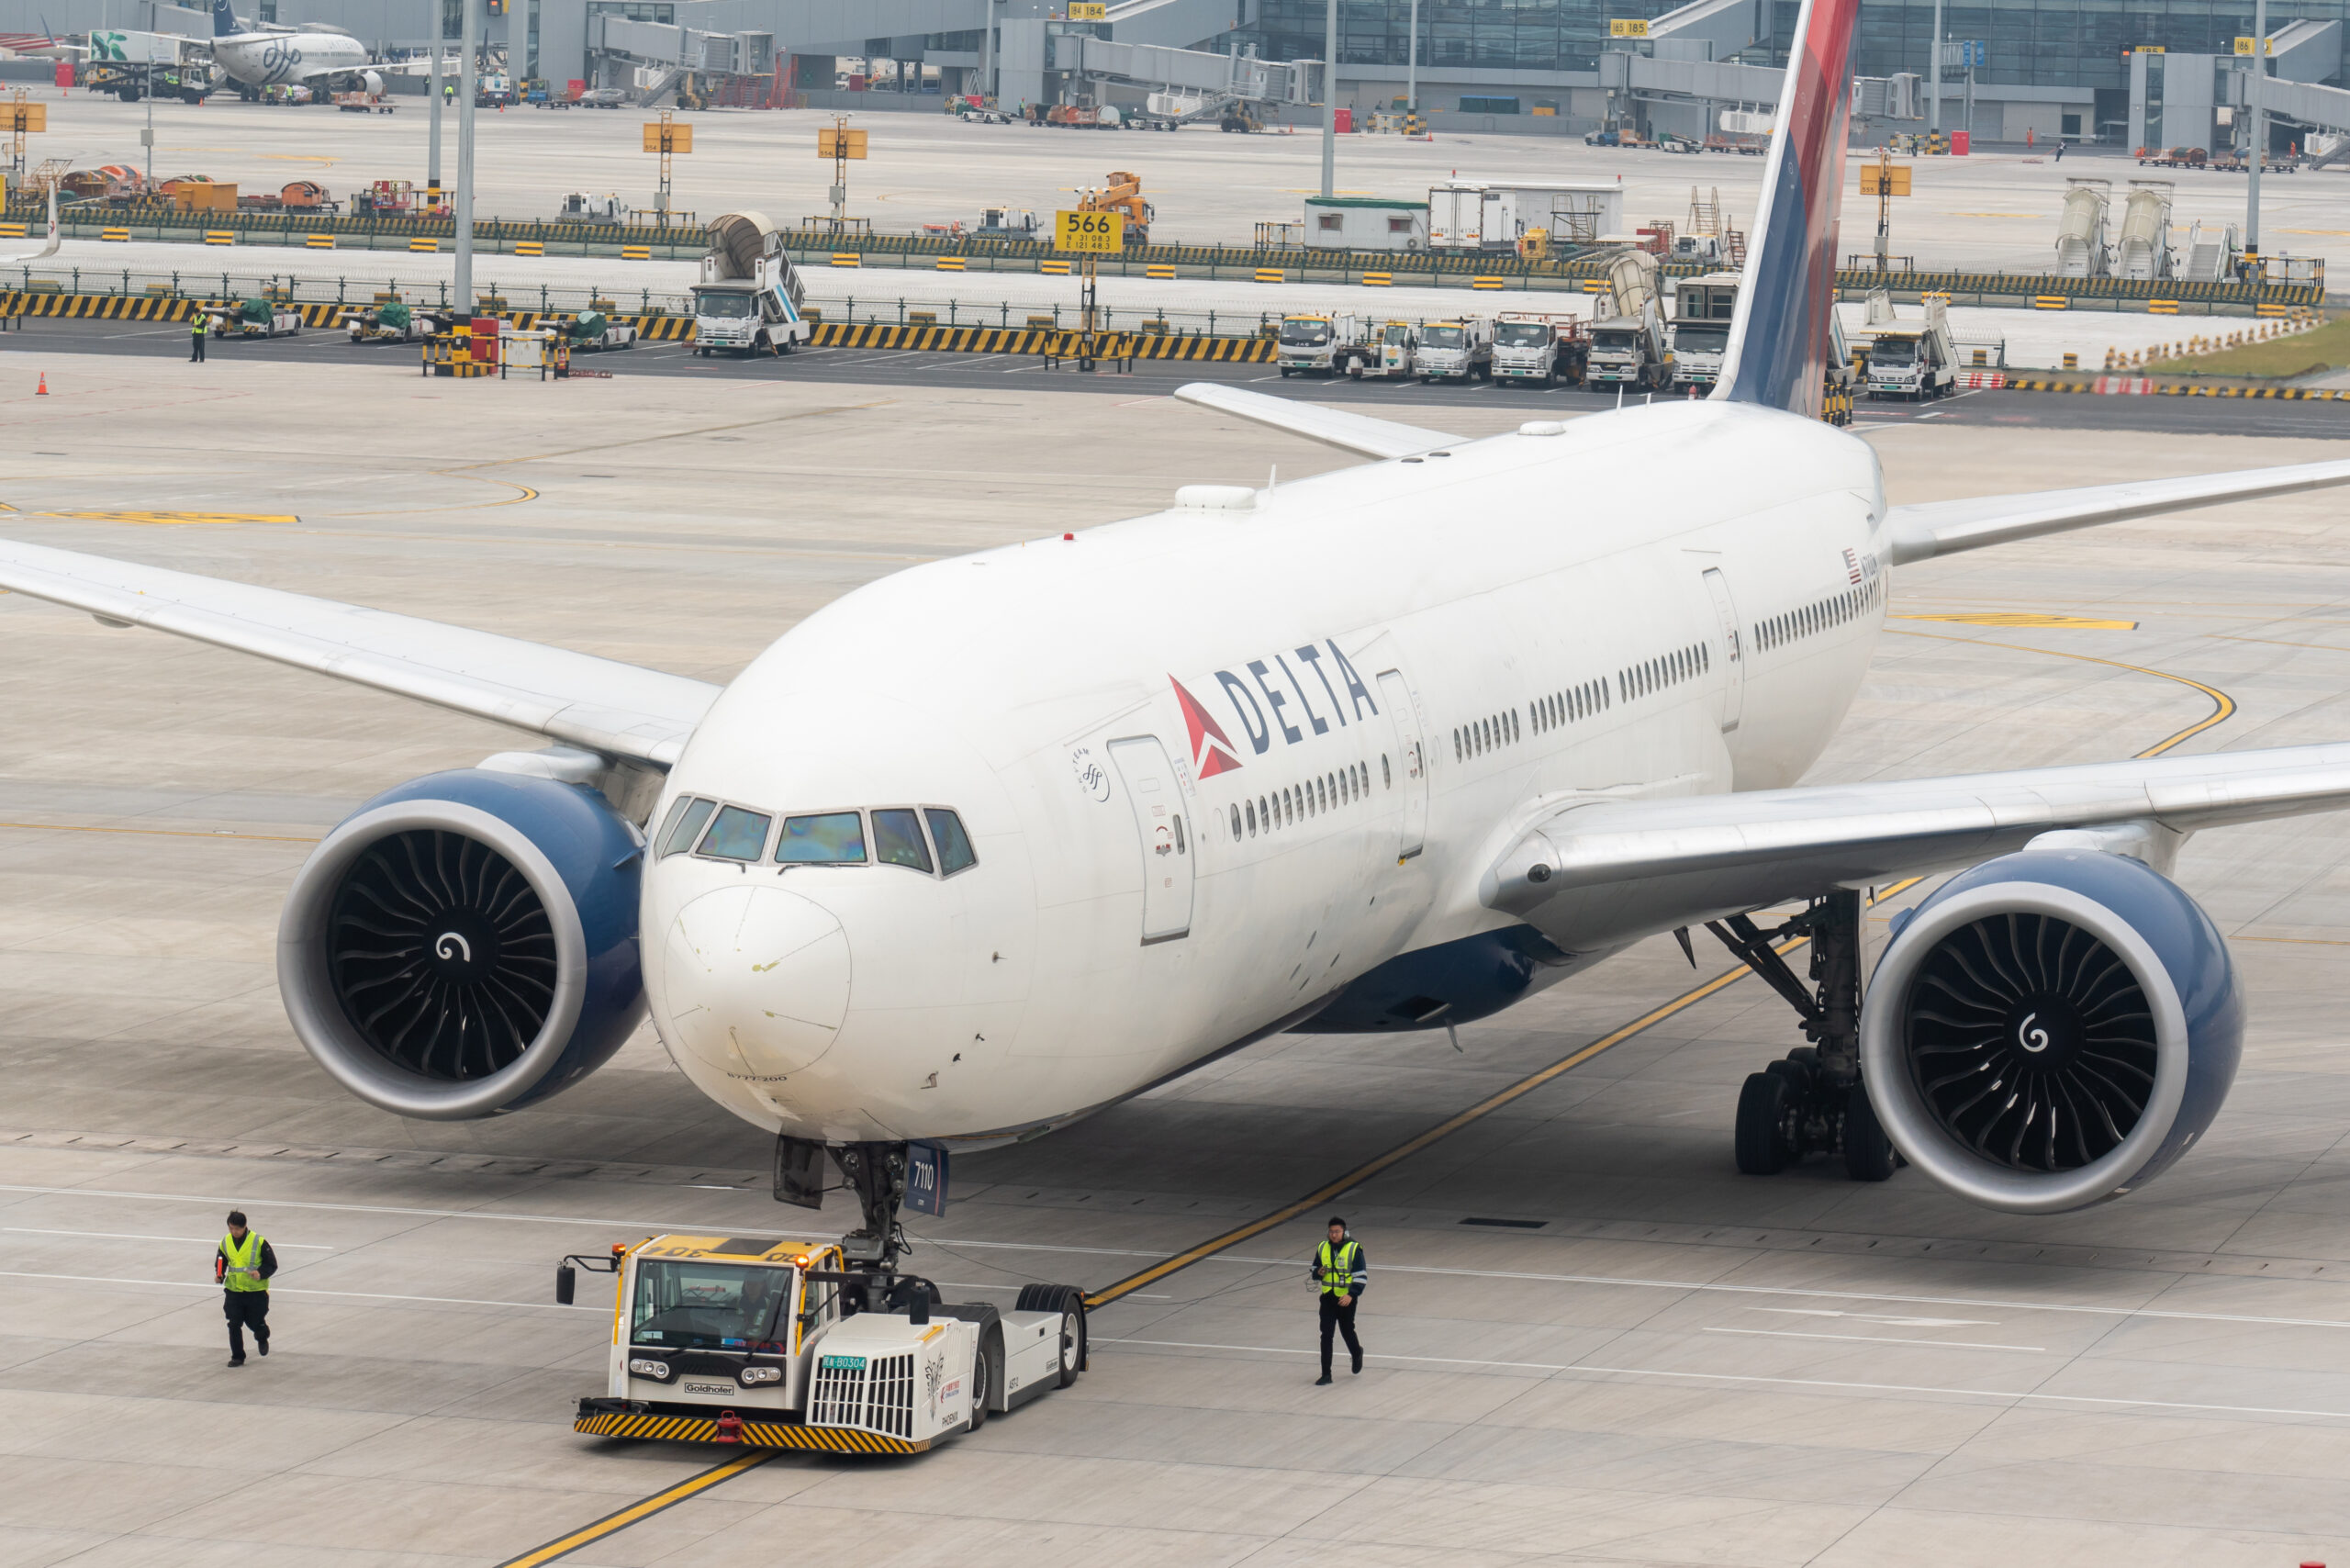 Delta Approves 34% Pay Raise For Pilots As Shortages Continue